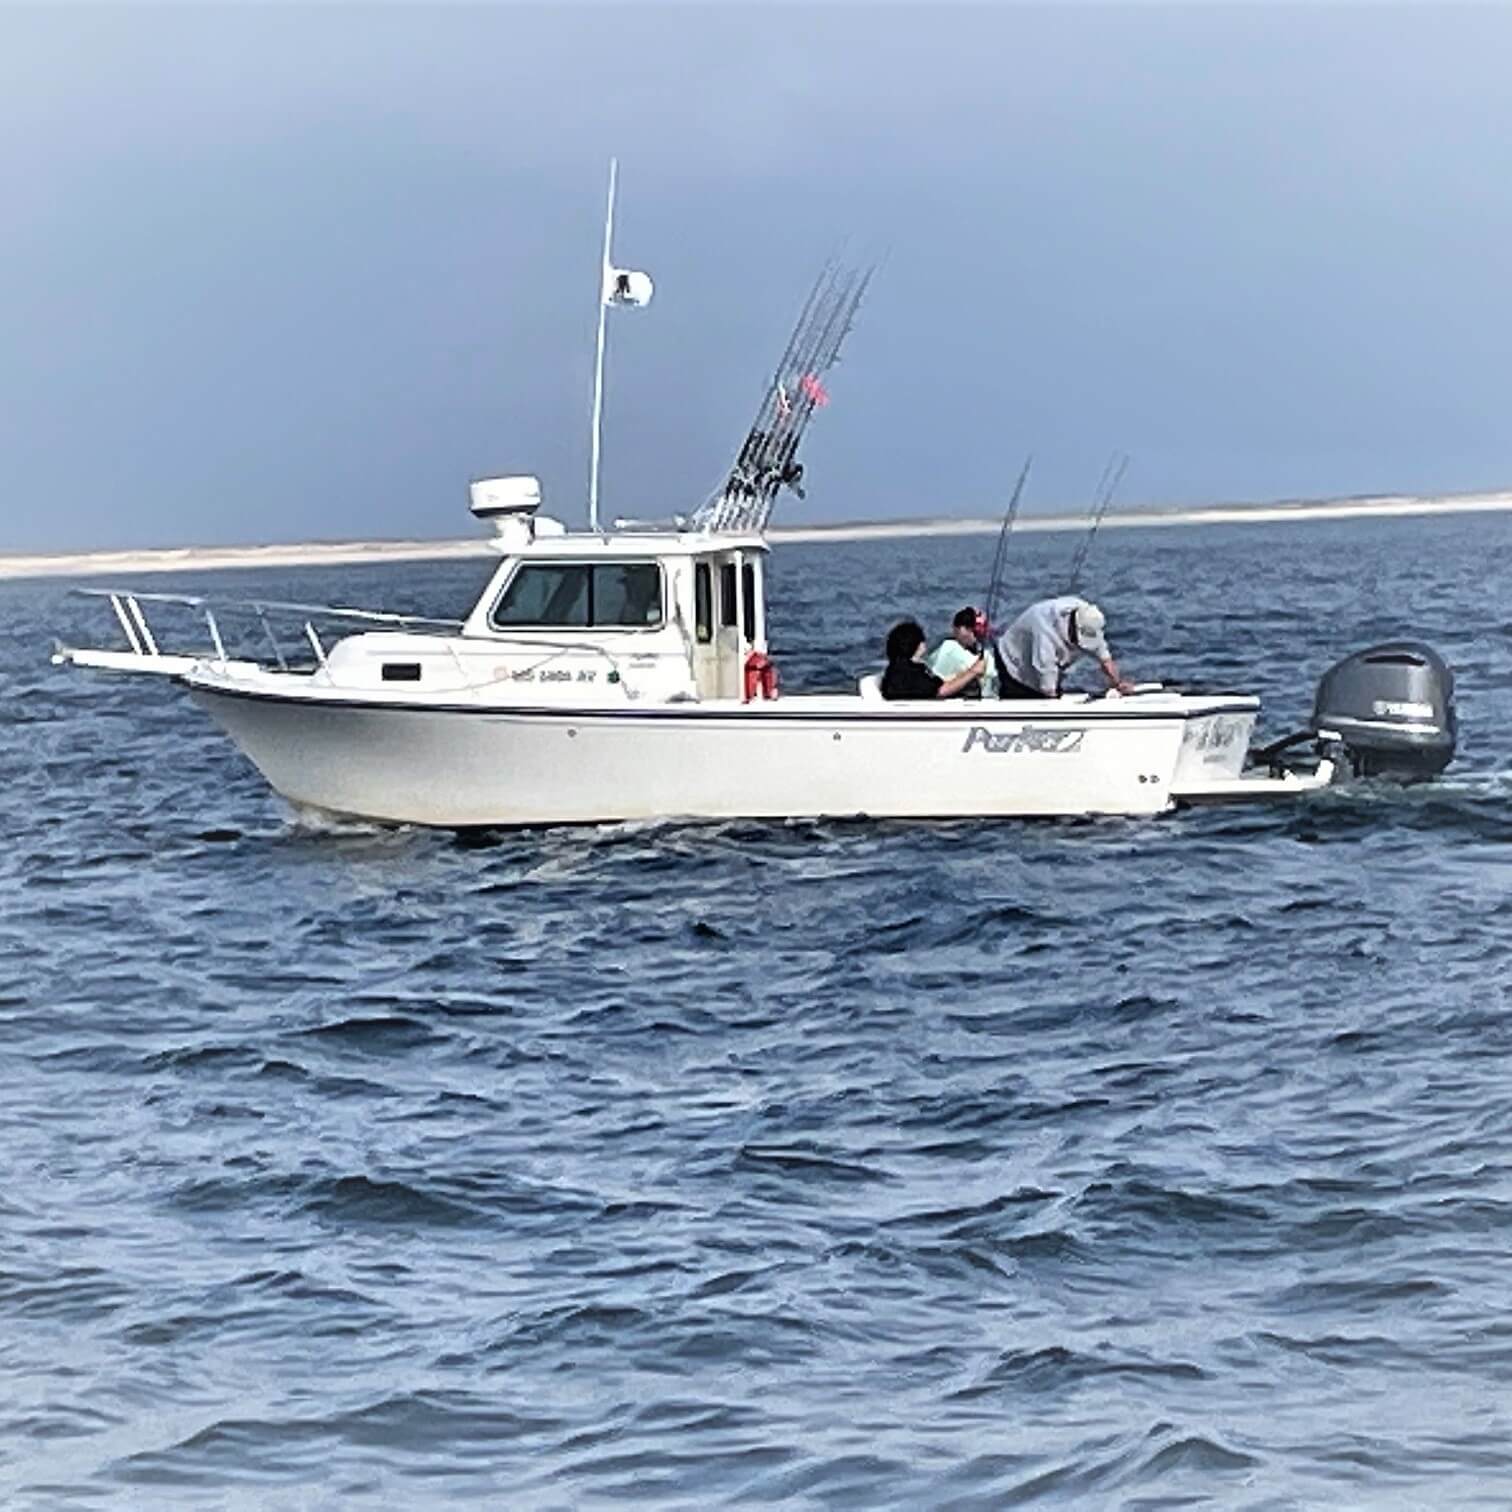 About the St. Pete. Cape Cod Sport Fishing Charter